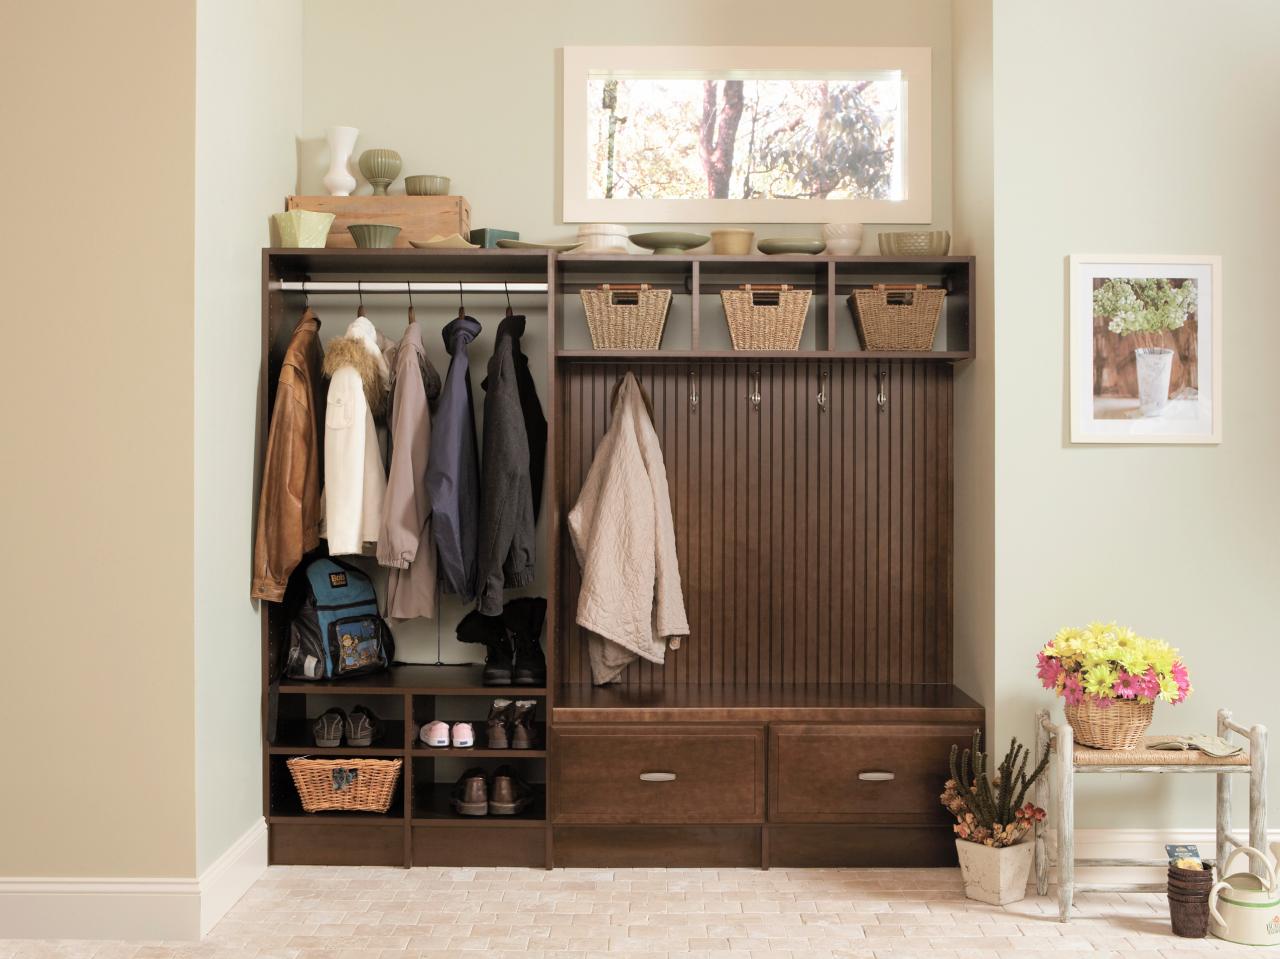 Two resale value boosting solutions for transforming an unused wooden mudroom into a functional space with coat racks and drawers.